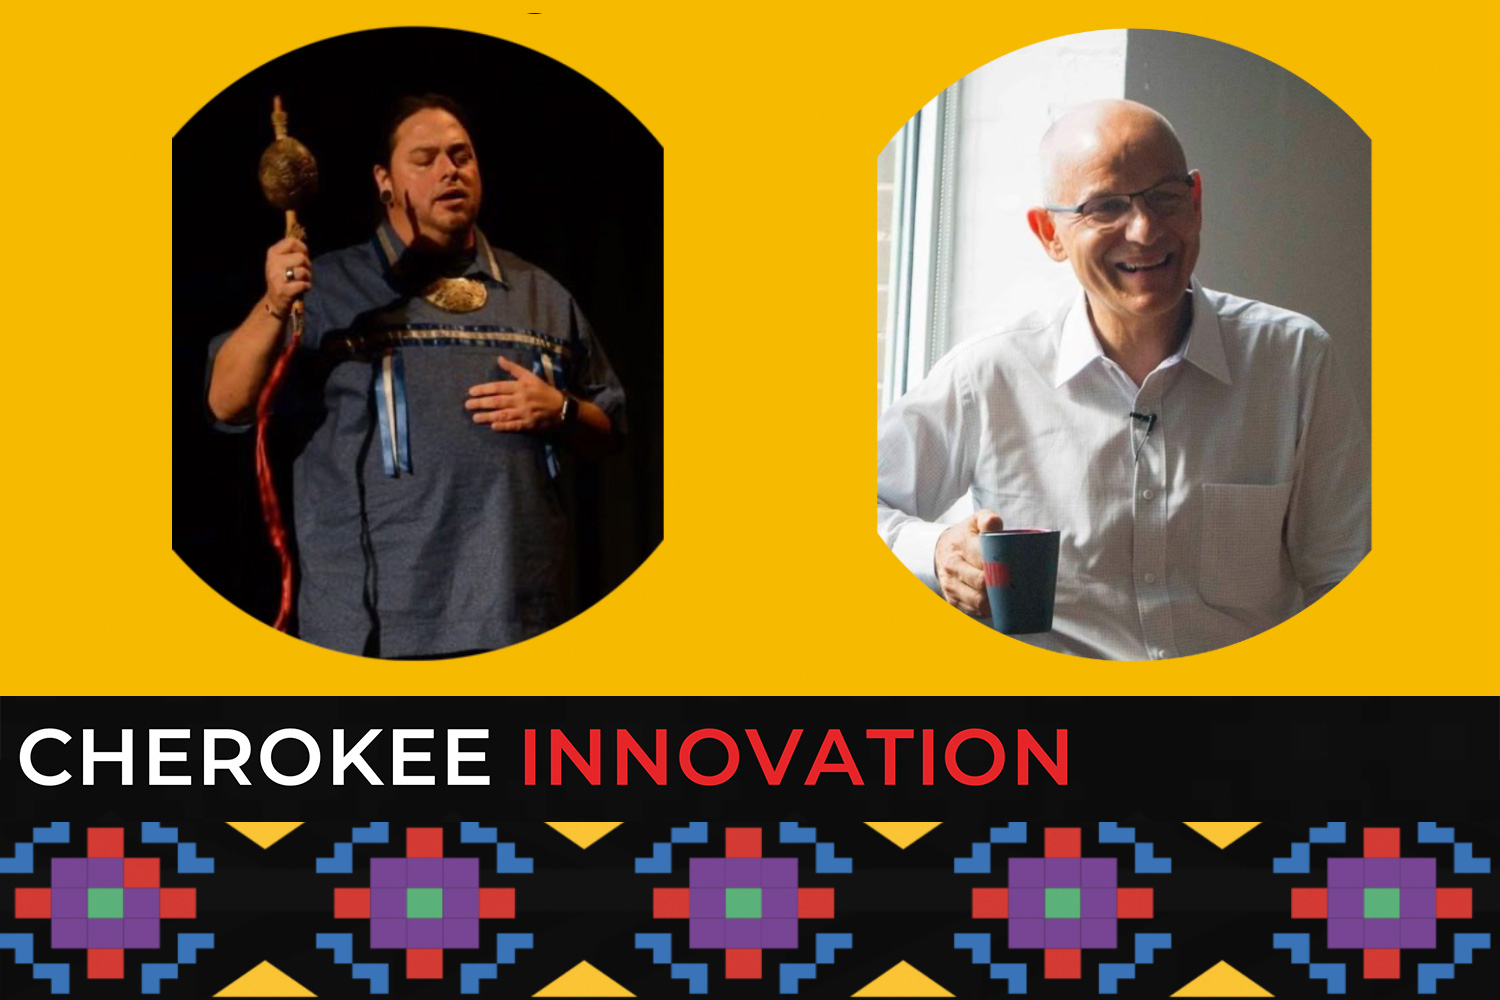 Lessons in innovation based on values of the Cherokee Nation